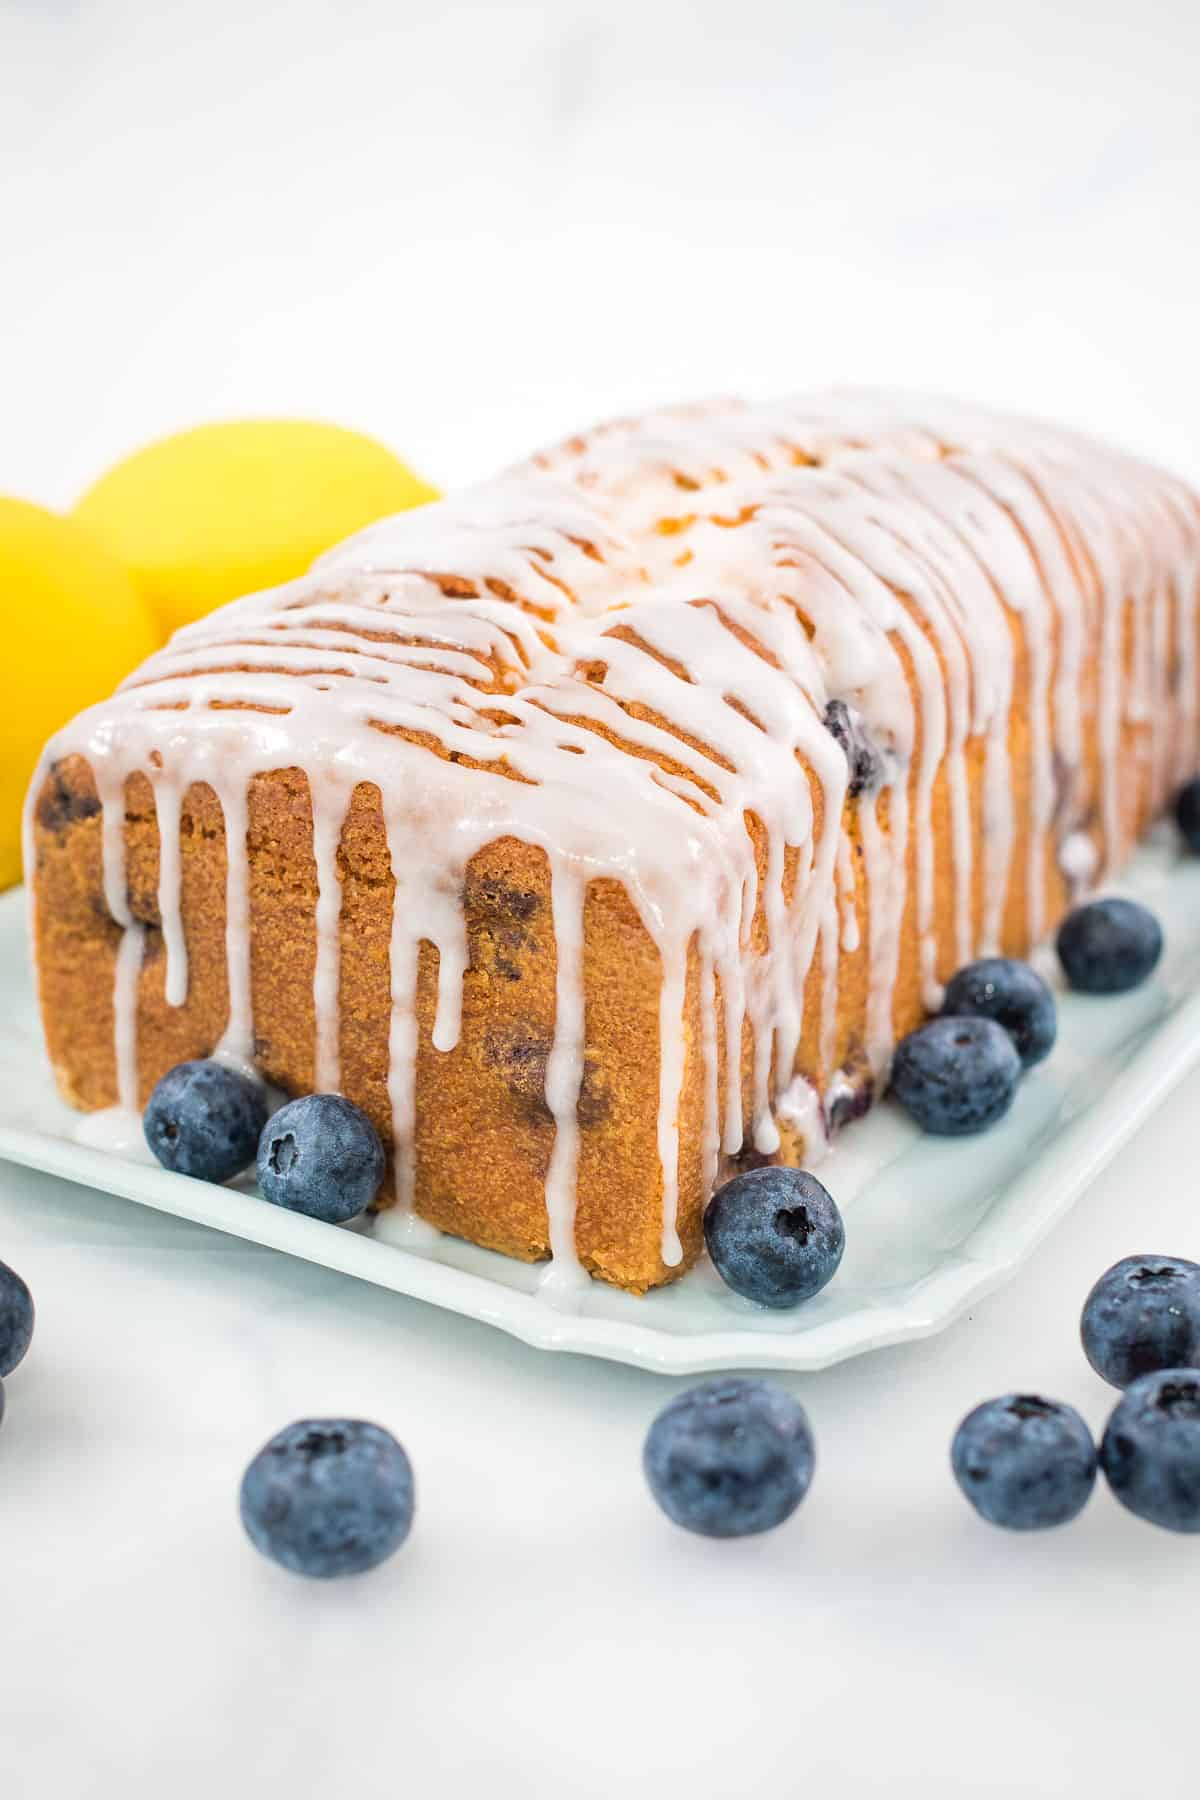 A loaf cake with glaze icing, blueberries and lemons on the side